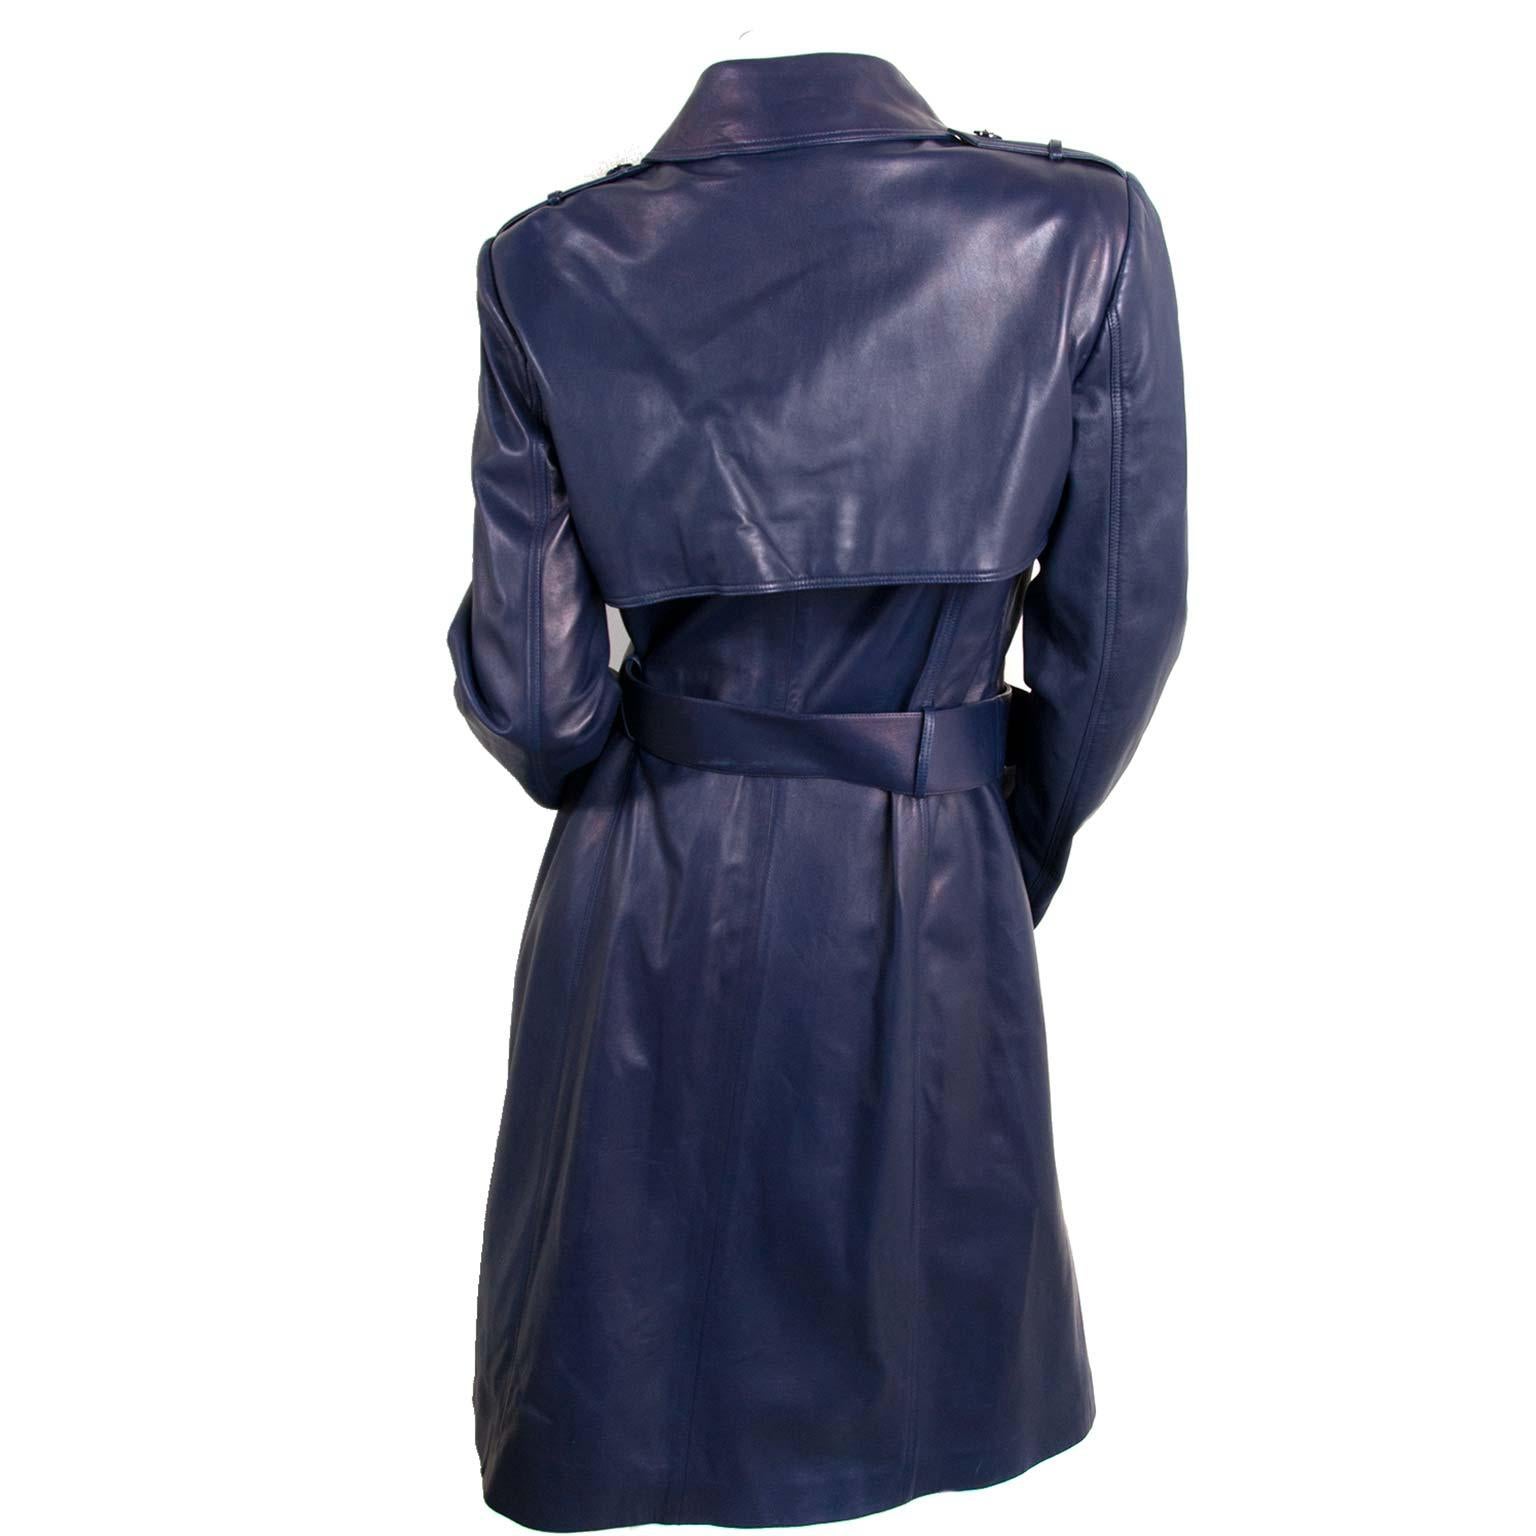 Excellent condition

Versace Dark Blue Leather Trench Coat - Size 46

Influencers all around the world are bringing the '90 back. Leather clothing with big, bright golden details are super trending right now.
This dark blue leather coat by Versace,